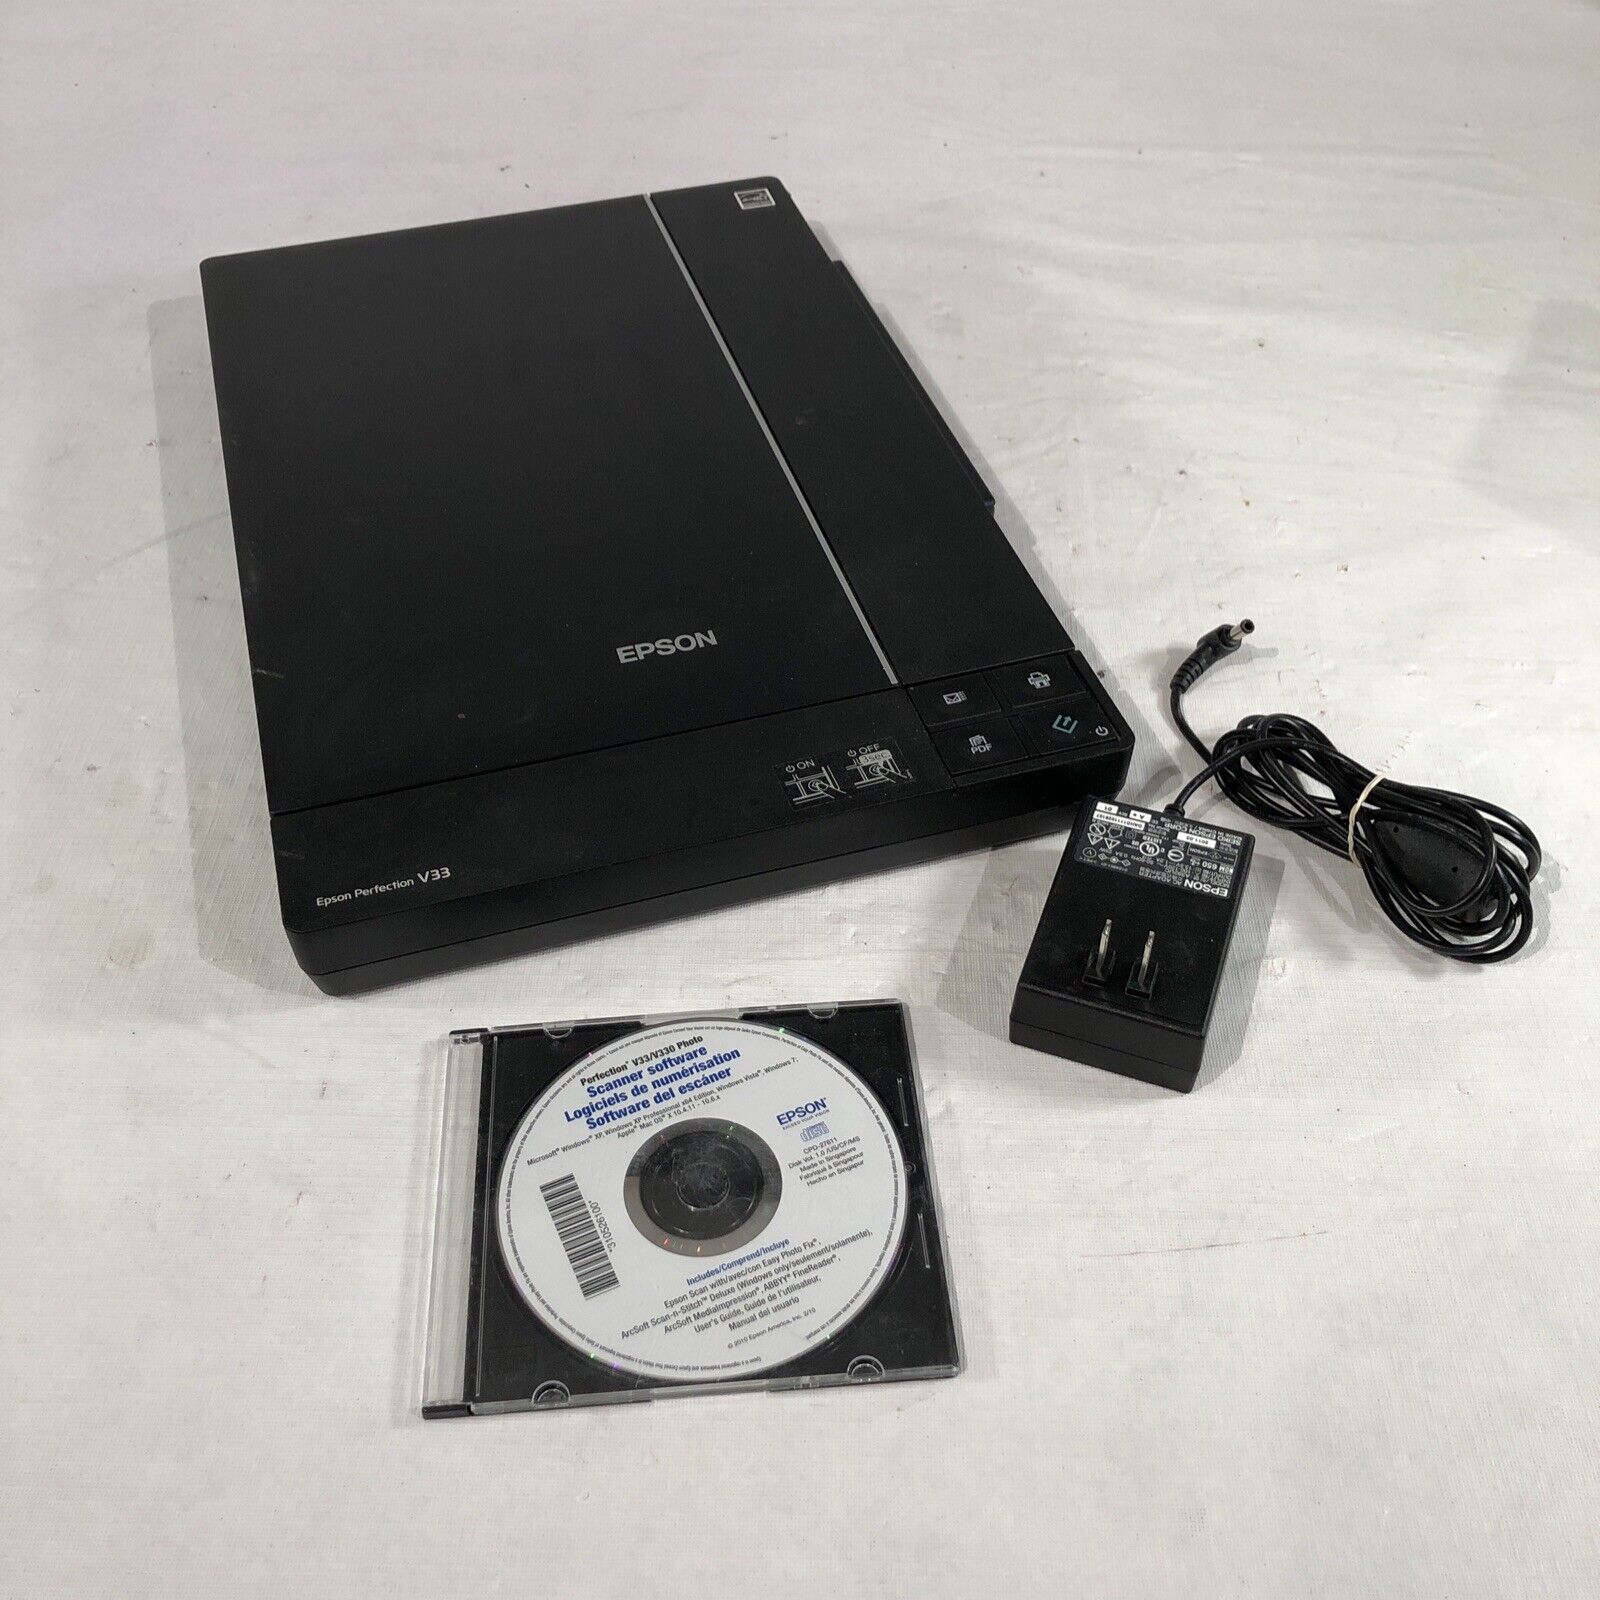 Epson Perfection V33 Flatbed Color Photo Document Scanner w/ Power Adapter 